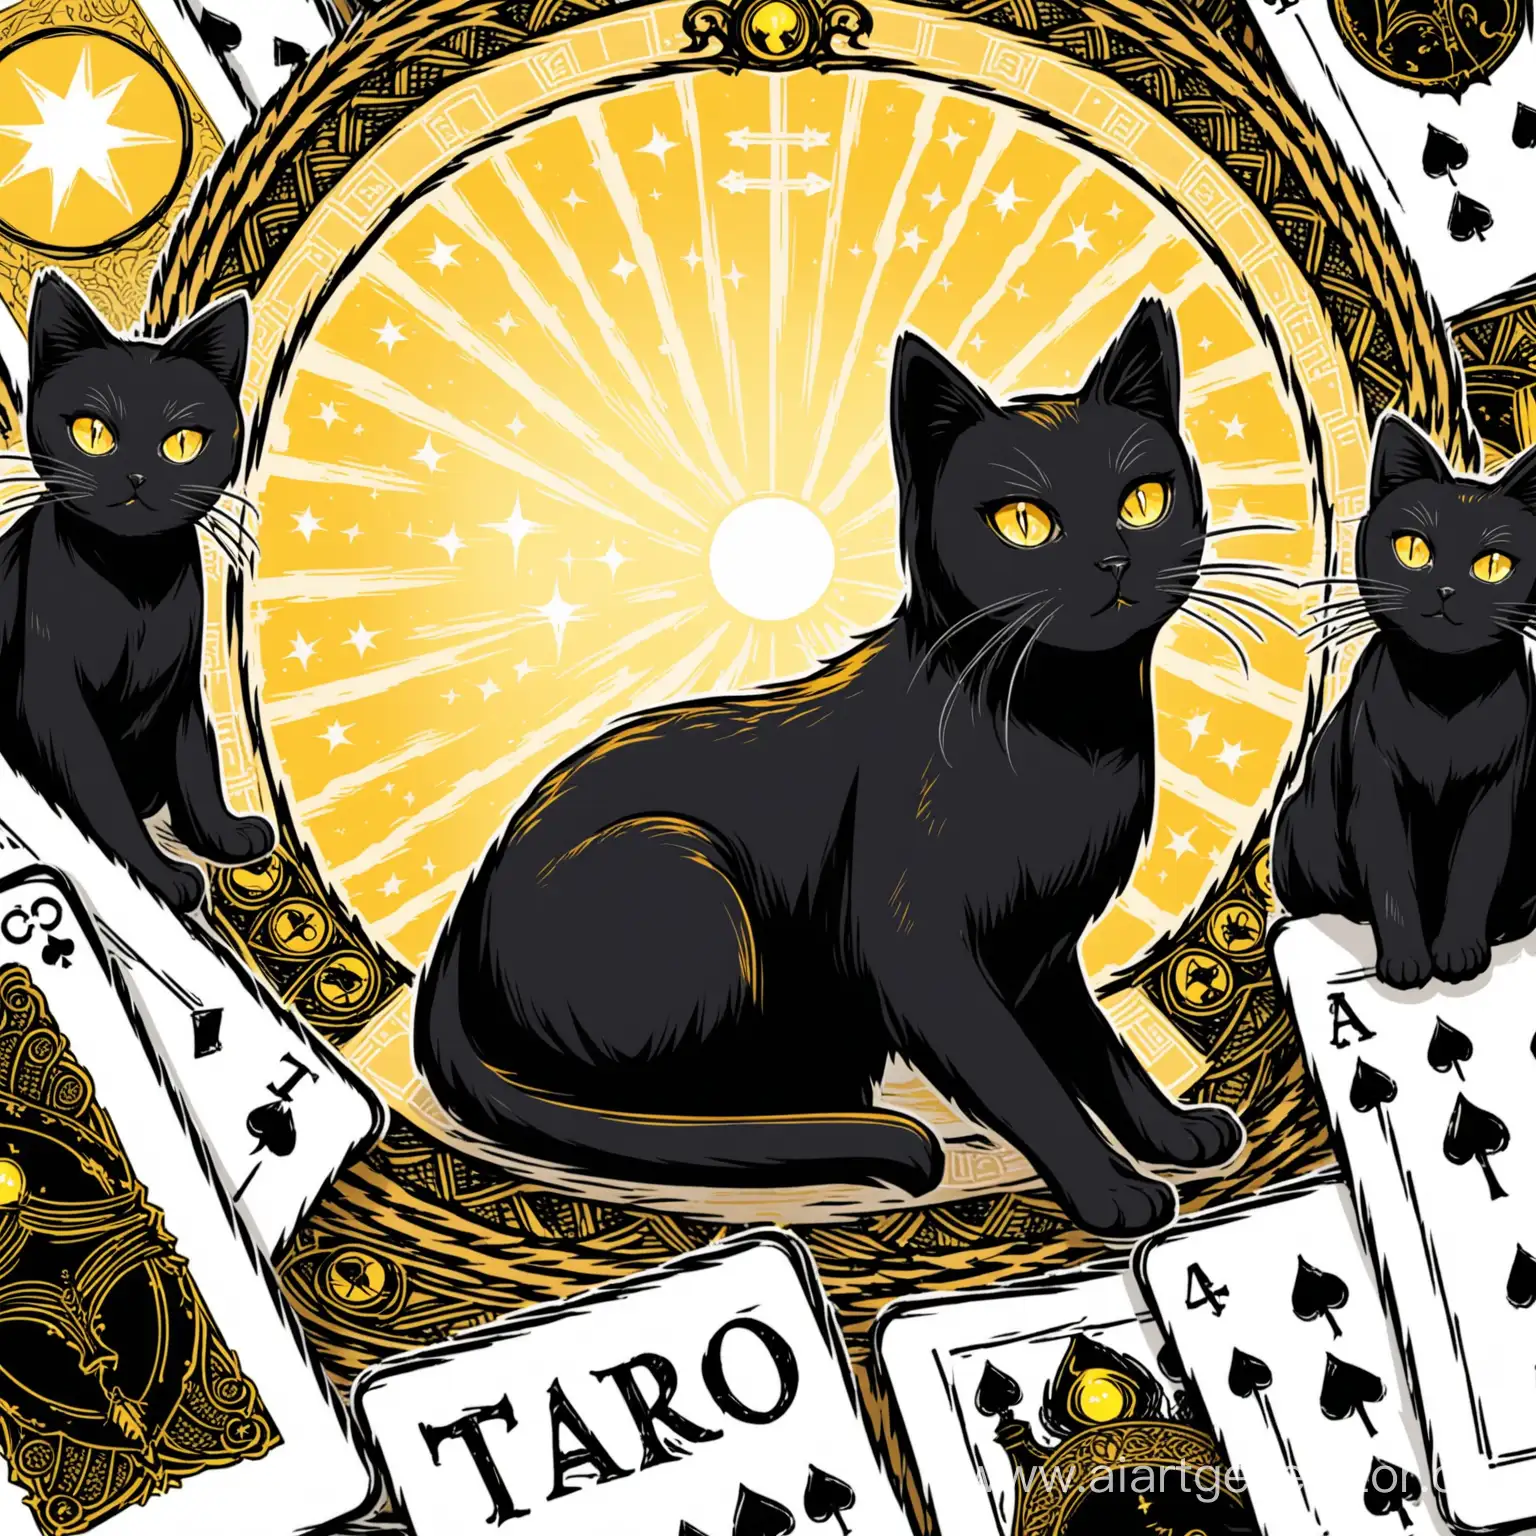 Mystical-Black-Cats-with-Yellow-Eyes-Surrounded-by-Tarot-Cards-on-White-Background